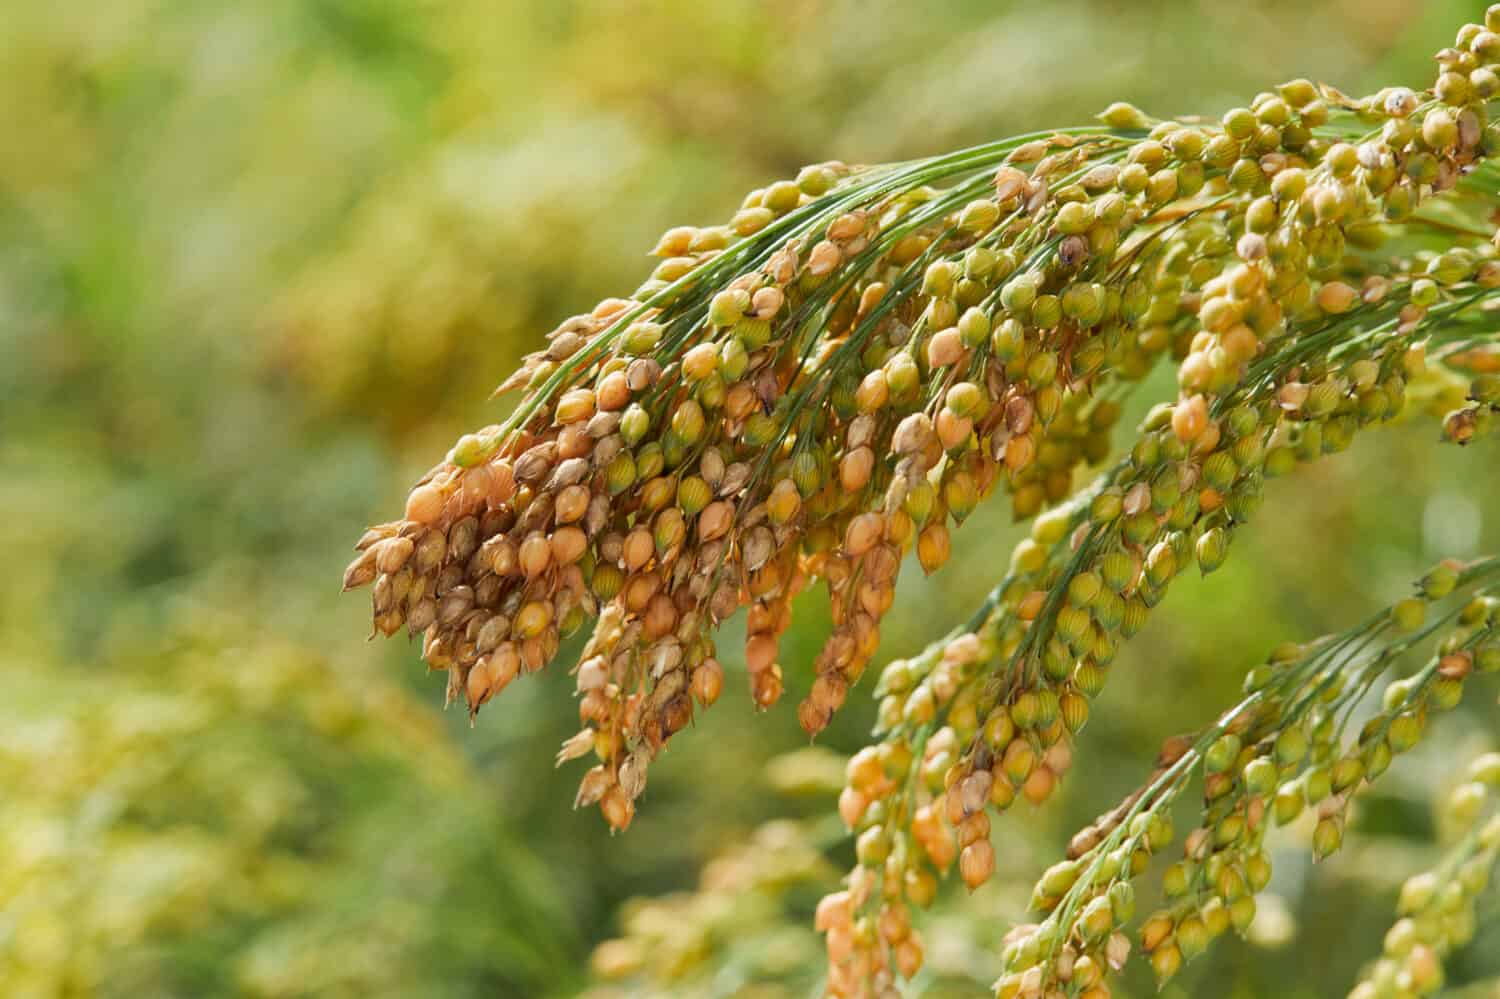 With its nutty flavor and versatility, Millet is a great addition to any meal